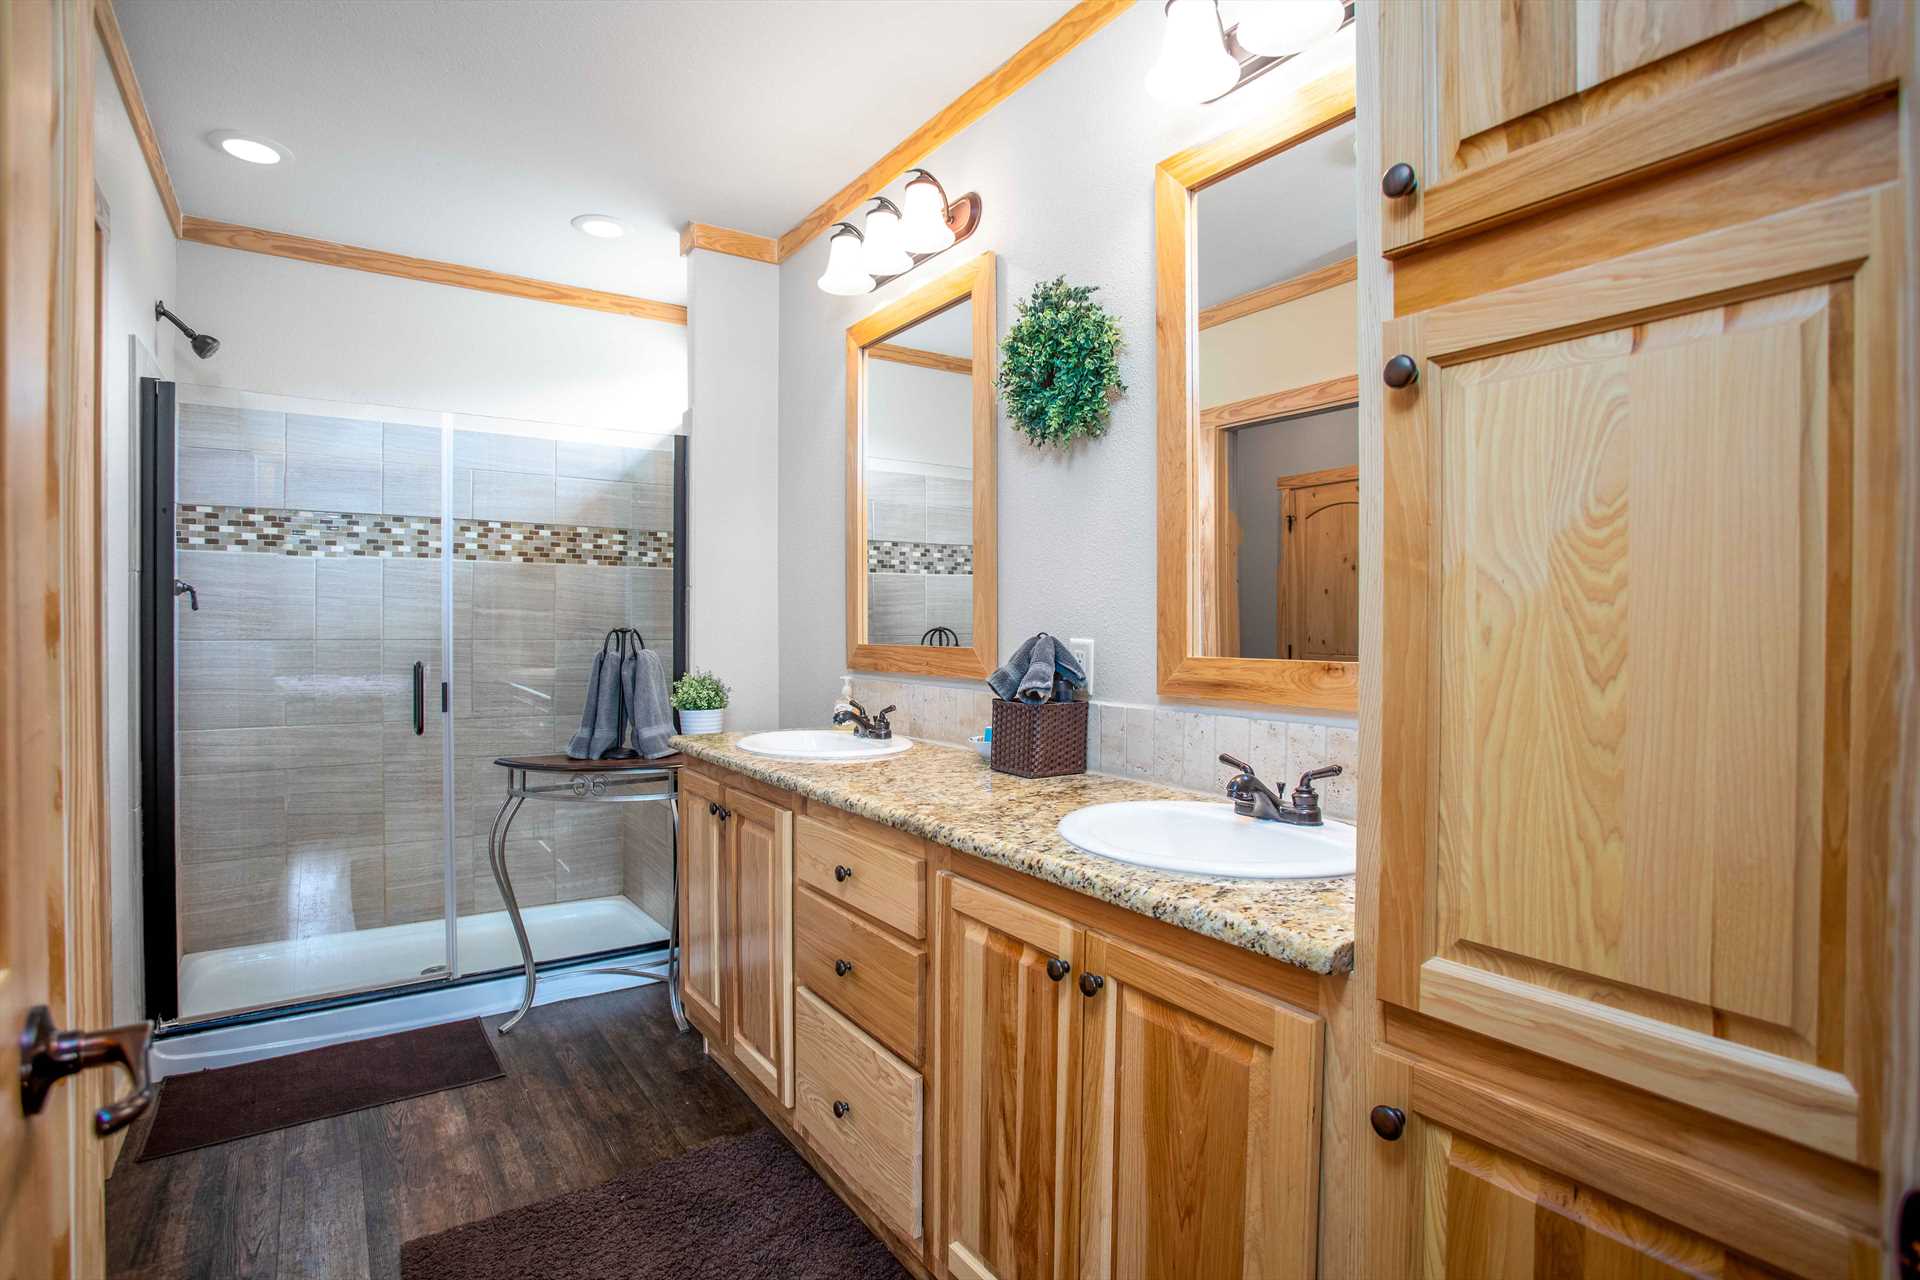                                                 Twin vanities, a shower, and a spacious closet are all available for your use in the master bathroom!